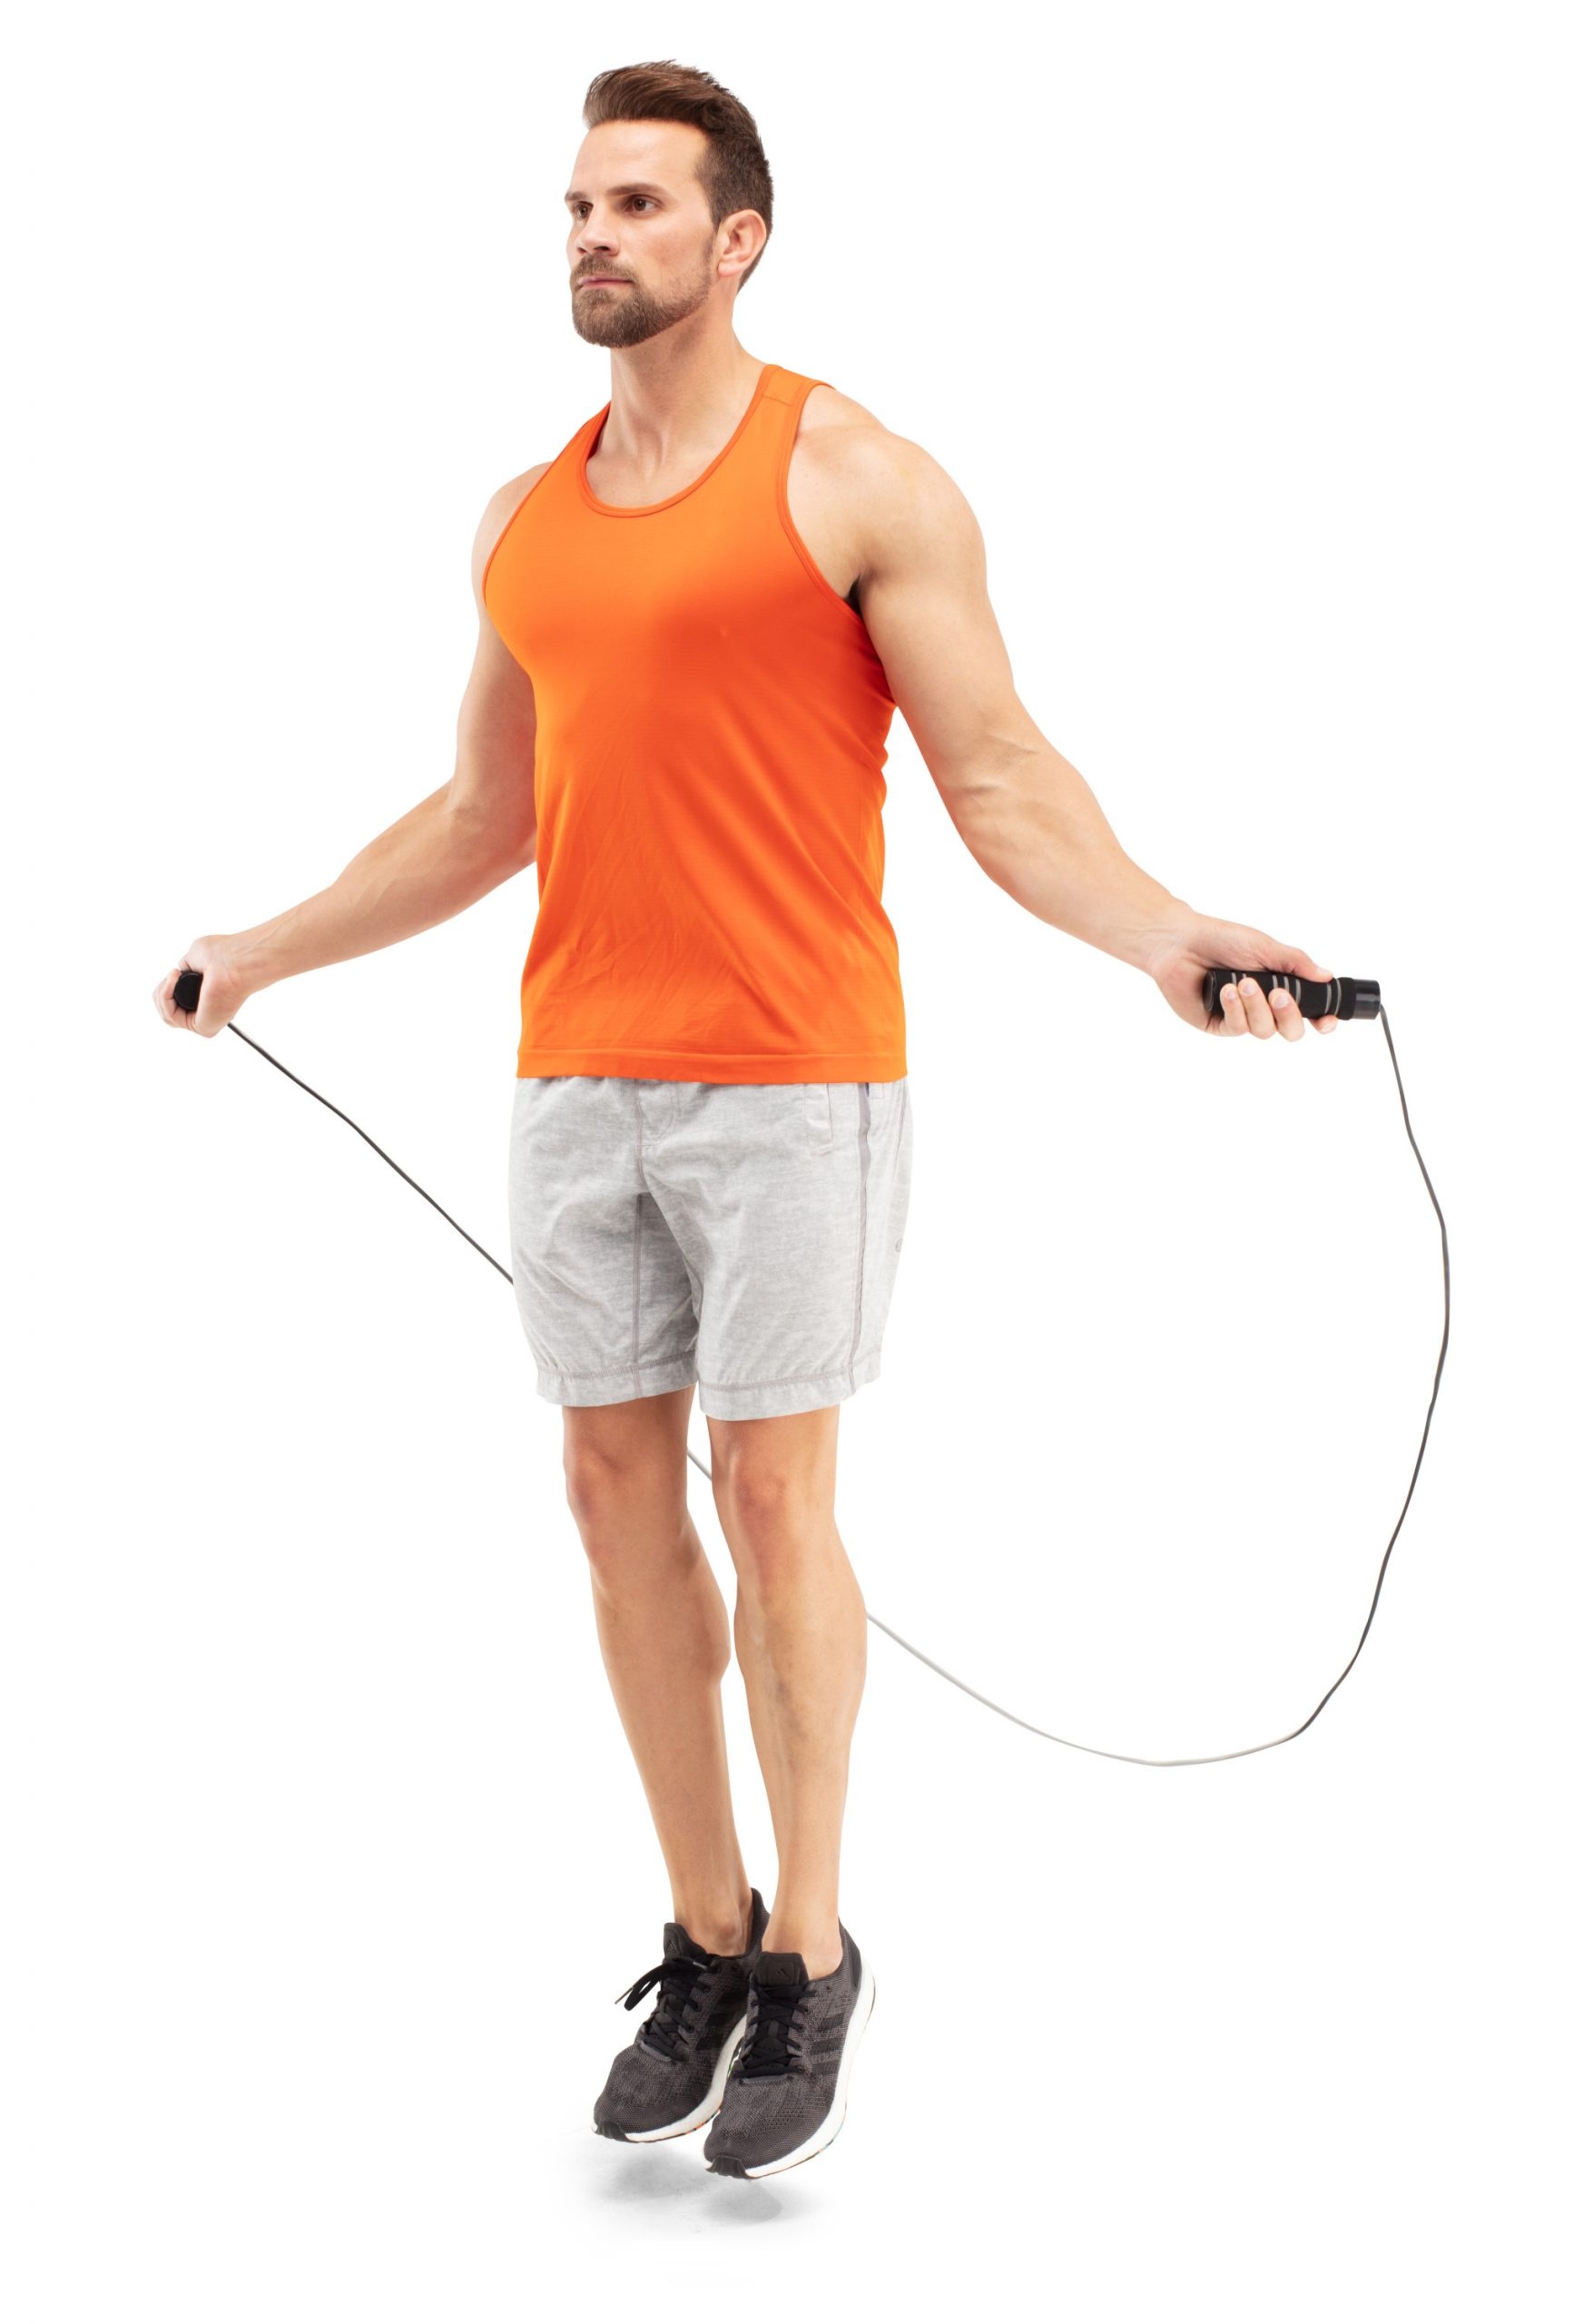 Rope Jumping: Athletic workout, 9-Foot weighted skip rope with adjustable length. 1740x2560 HD Wallpaper.